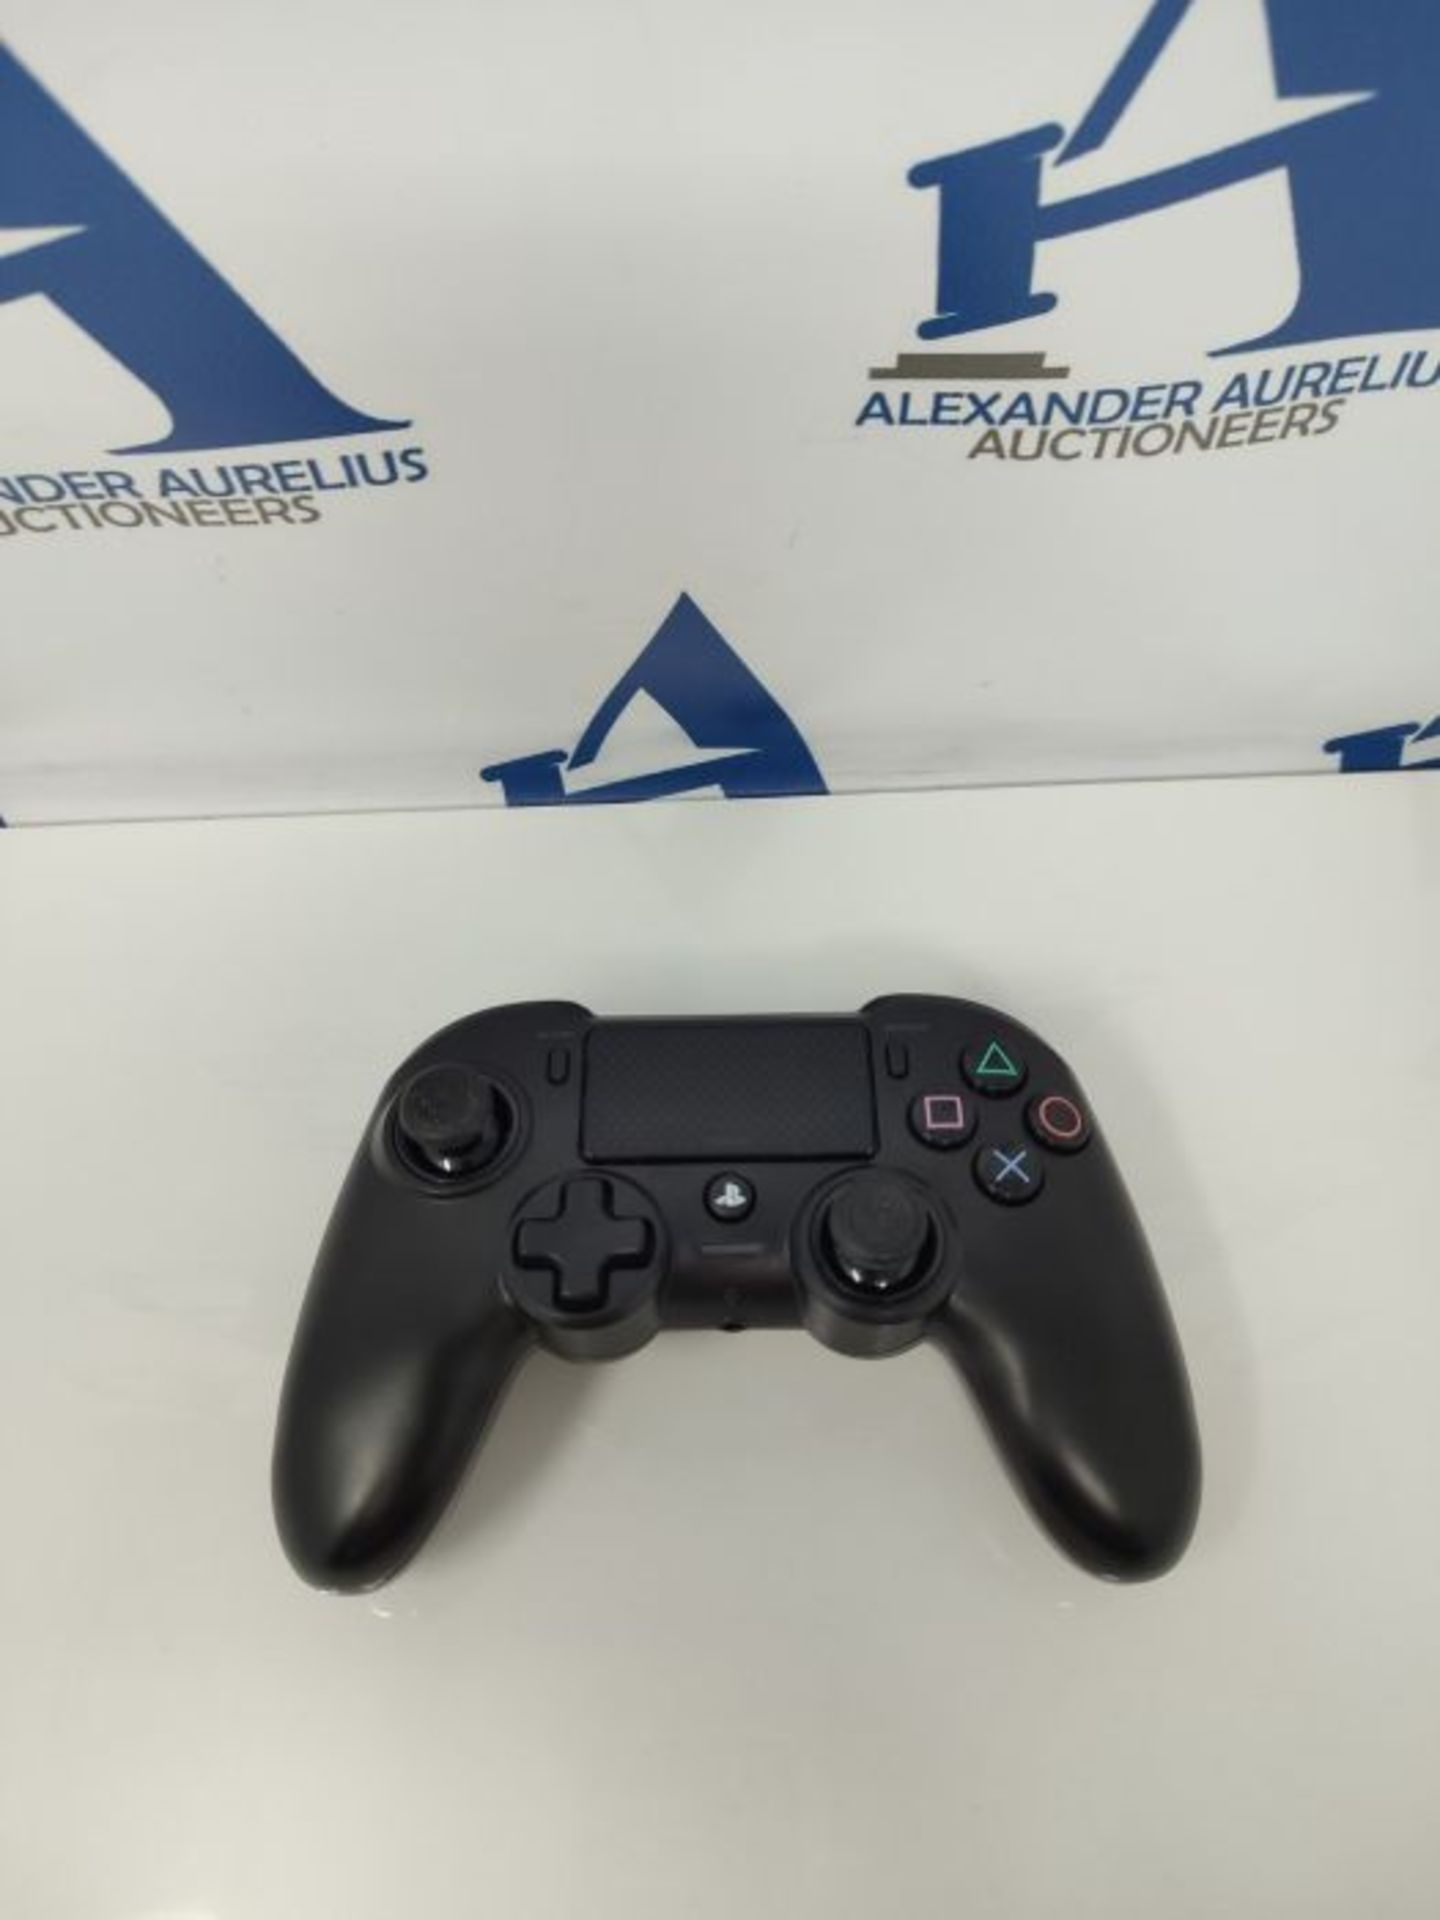 NACON Asymmetric Wireless PC Gamepad PlayStation 4 Black - Video Game Accessories (Gam - Image 2 of 2